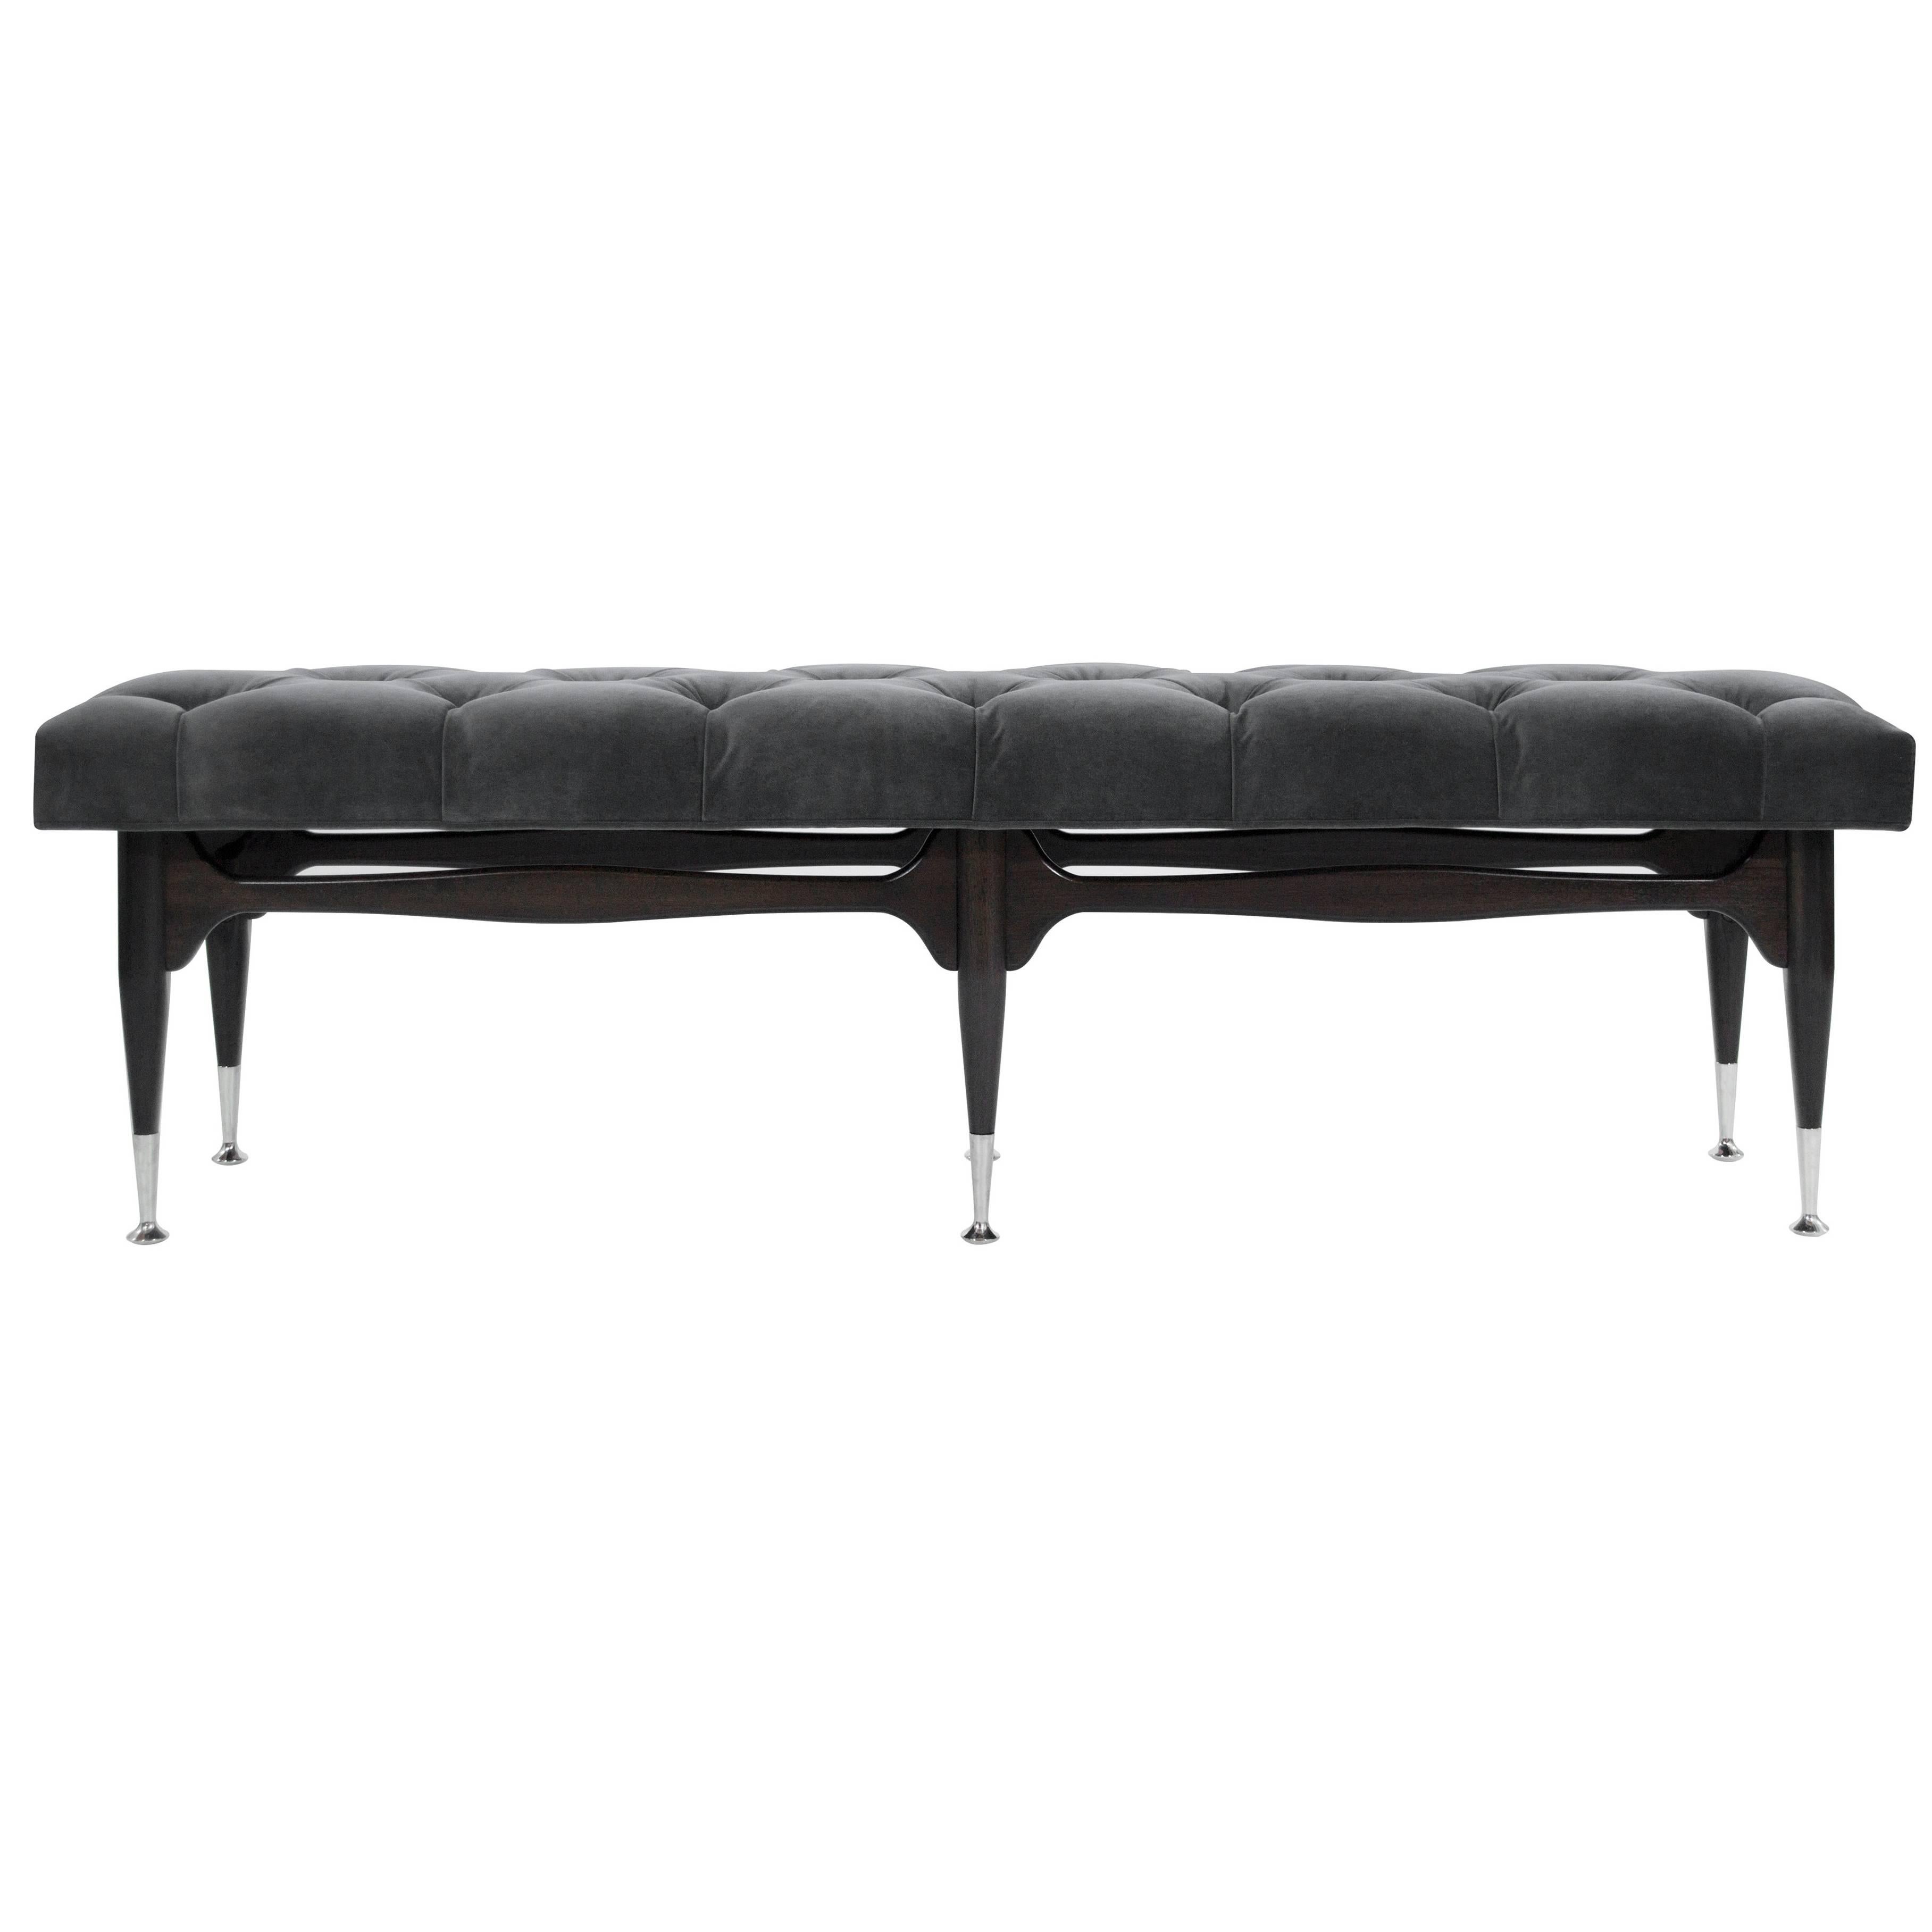 Mid-Century Modern sculpted mahogany bench, wood has been fully restored to its original espresso finish. Newly upholstered in tufted granite velvet. Nickel sabots newly polished. Pair available.